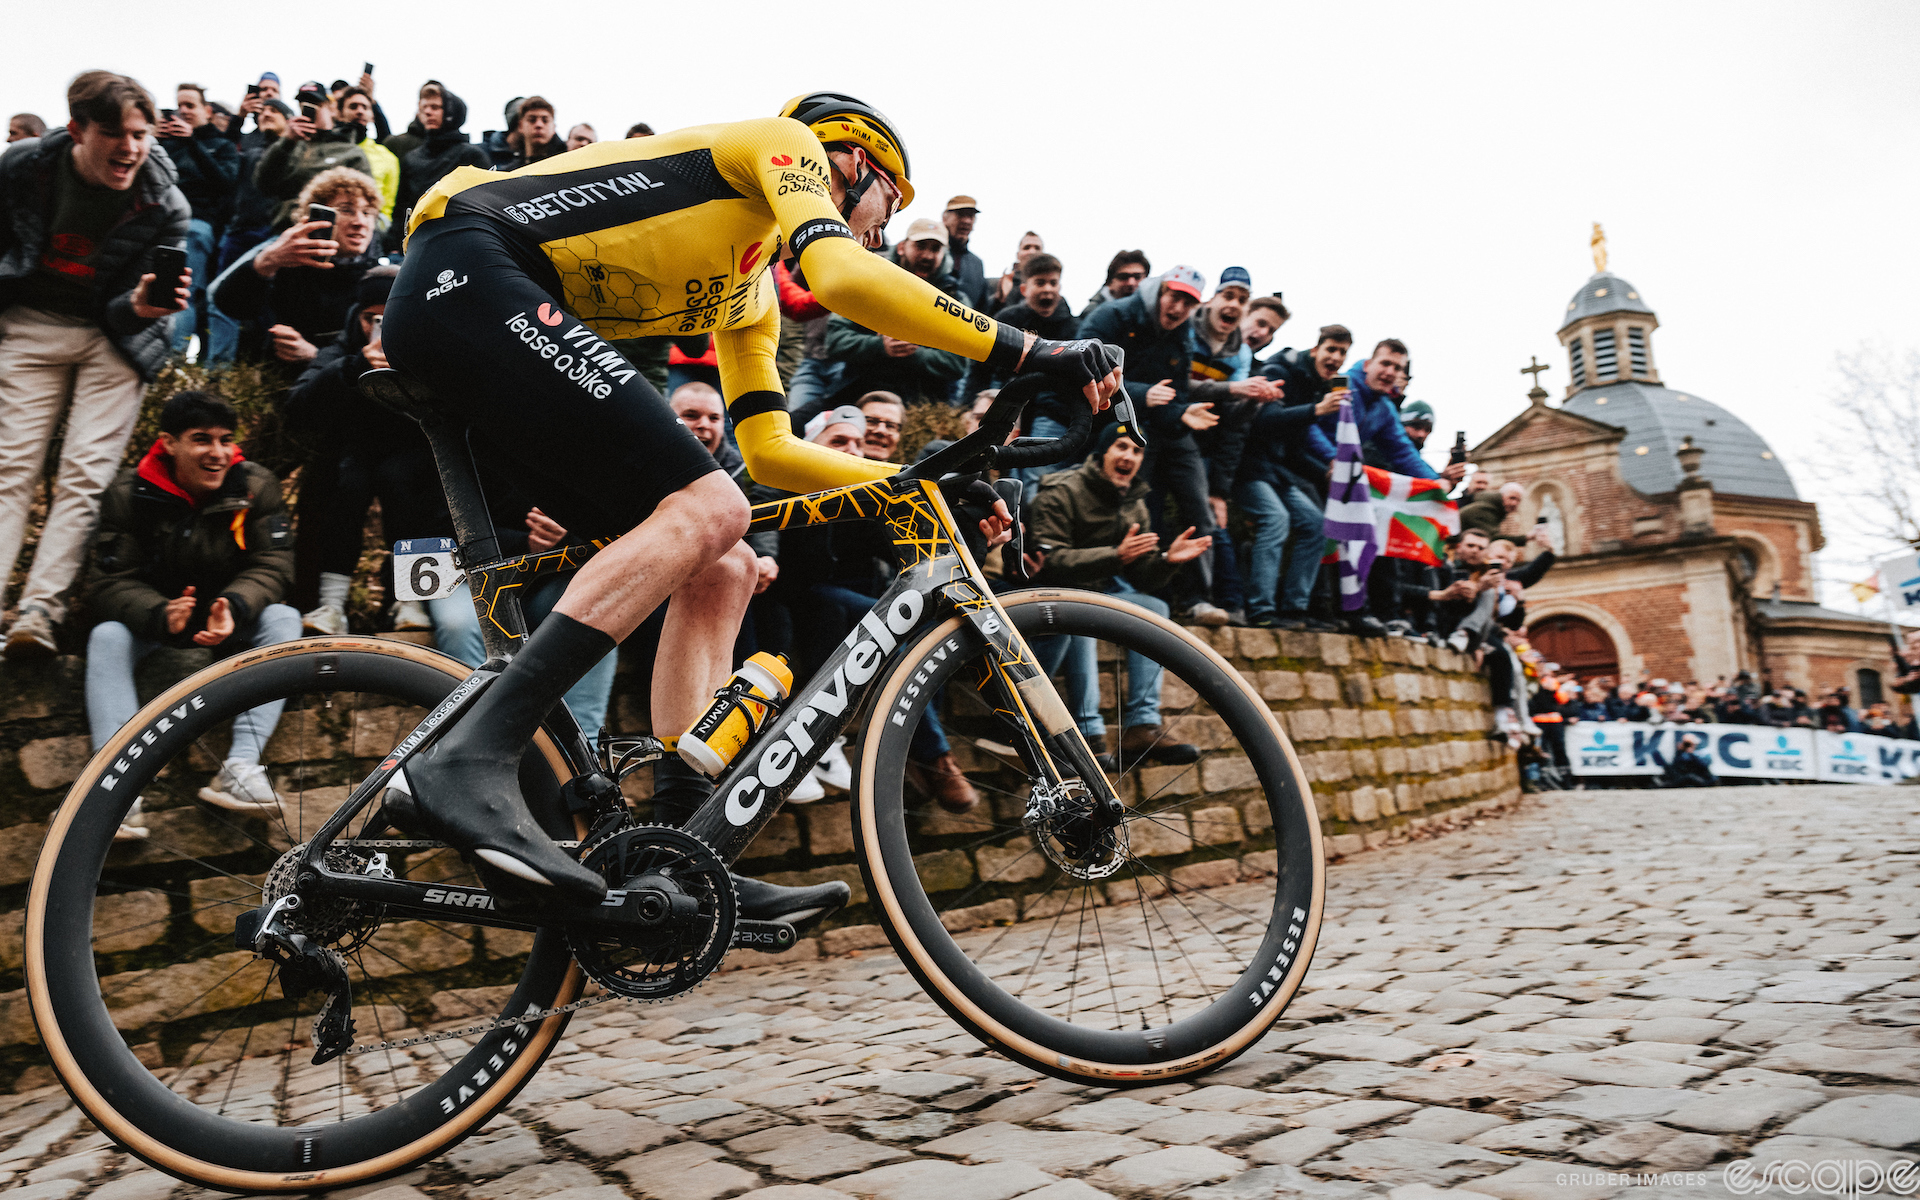 Matteo Jorgenson rides a solo breakaway up the Muur van Geraardsbergen at the 2024 Omloop Het Nieuwsblad. He's alone, at the top with the chapel looming on the right side of the picture. Fans lean over the stone wall to cheer. He's on an aero Cervelo S5 with 40/44 mm wheels, a skinsuit, and aero shoe covers.